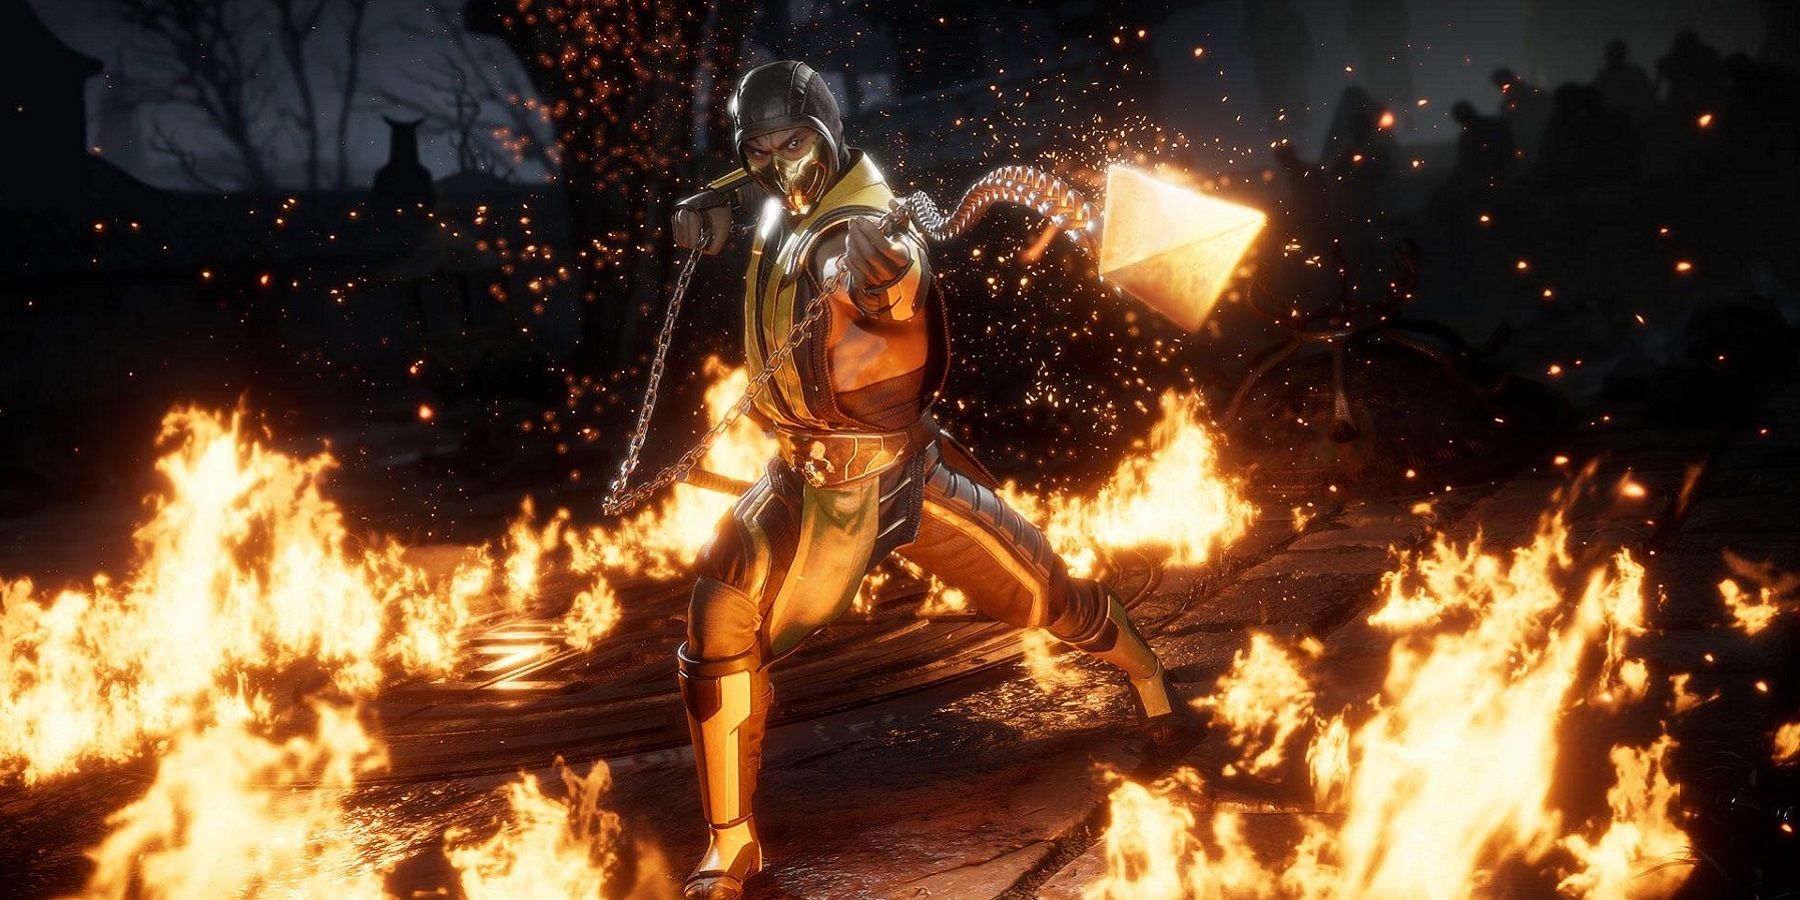 Image from Mortal Kombat showing Scorpion throwing his signature spear while standing near fire.